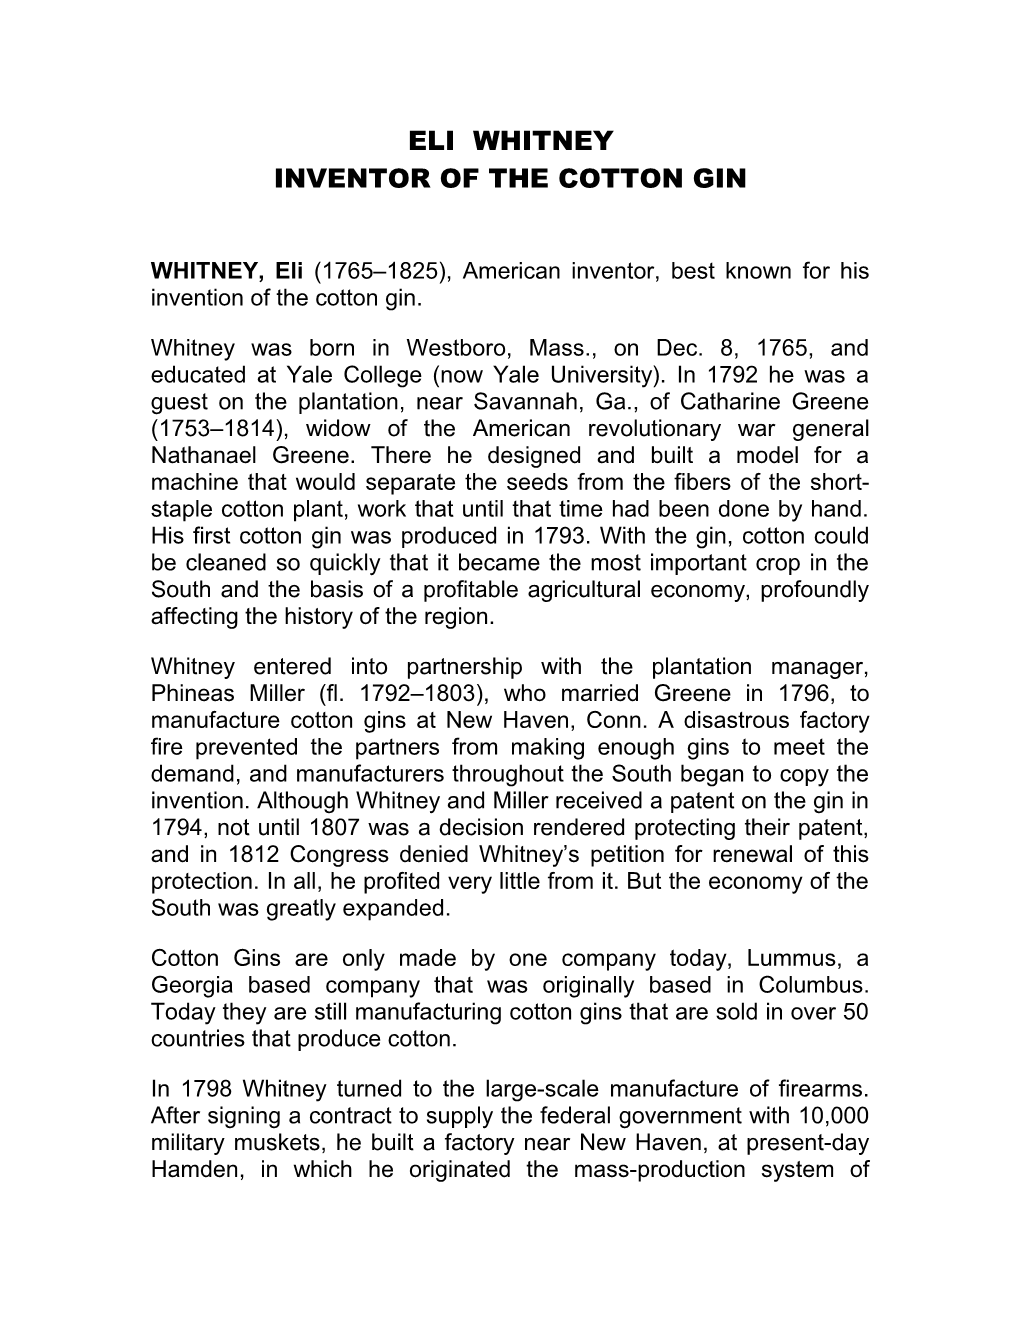 Inventor of the Cotton Gin